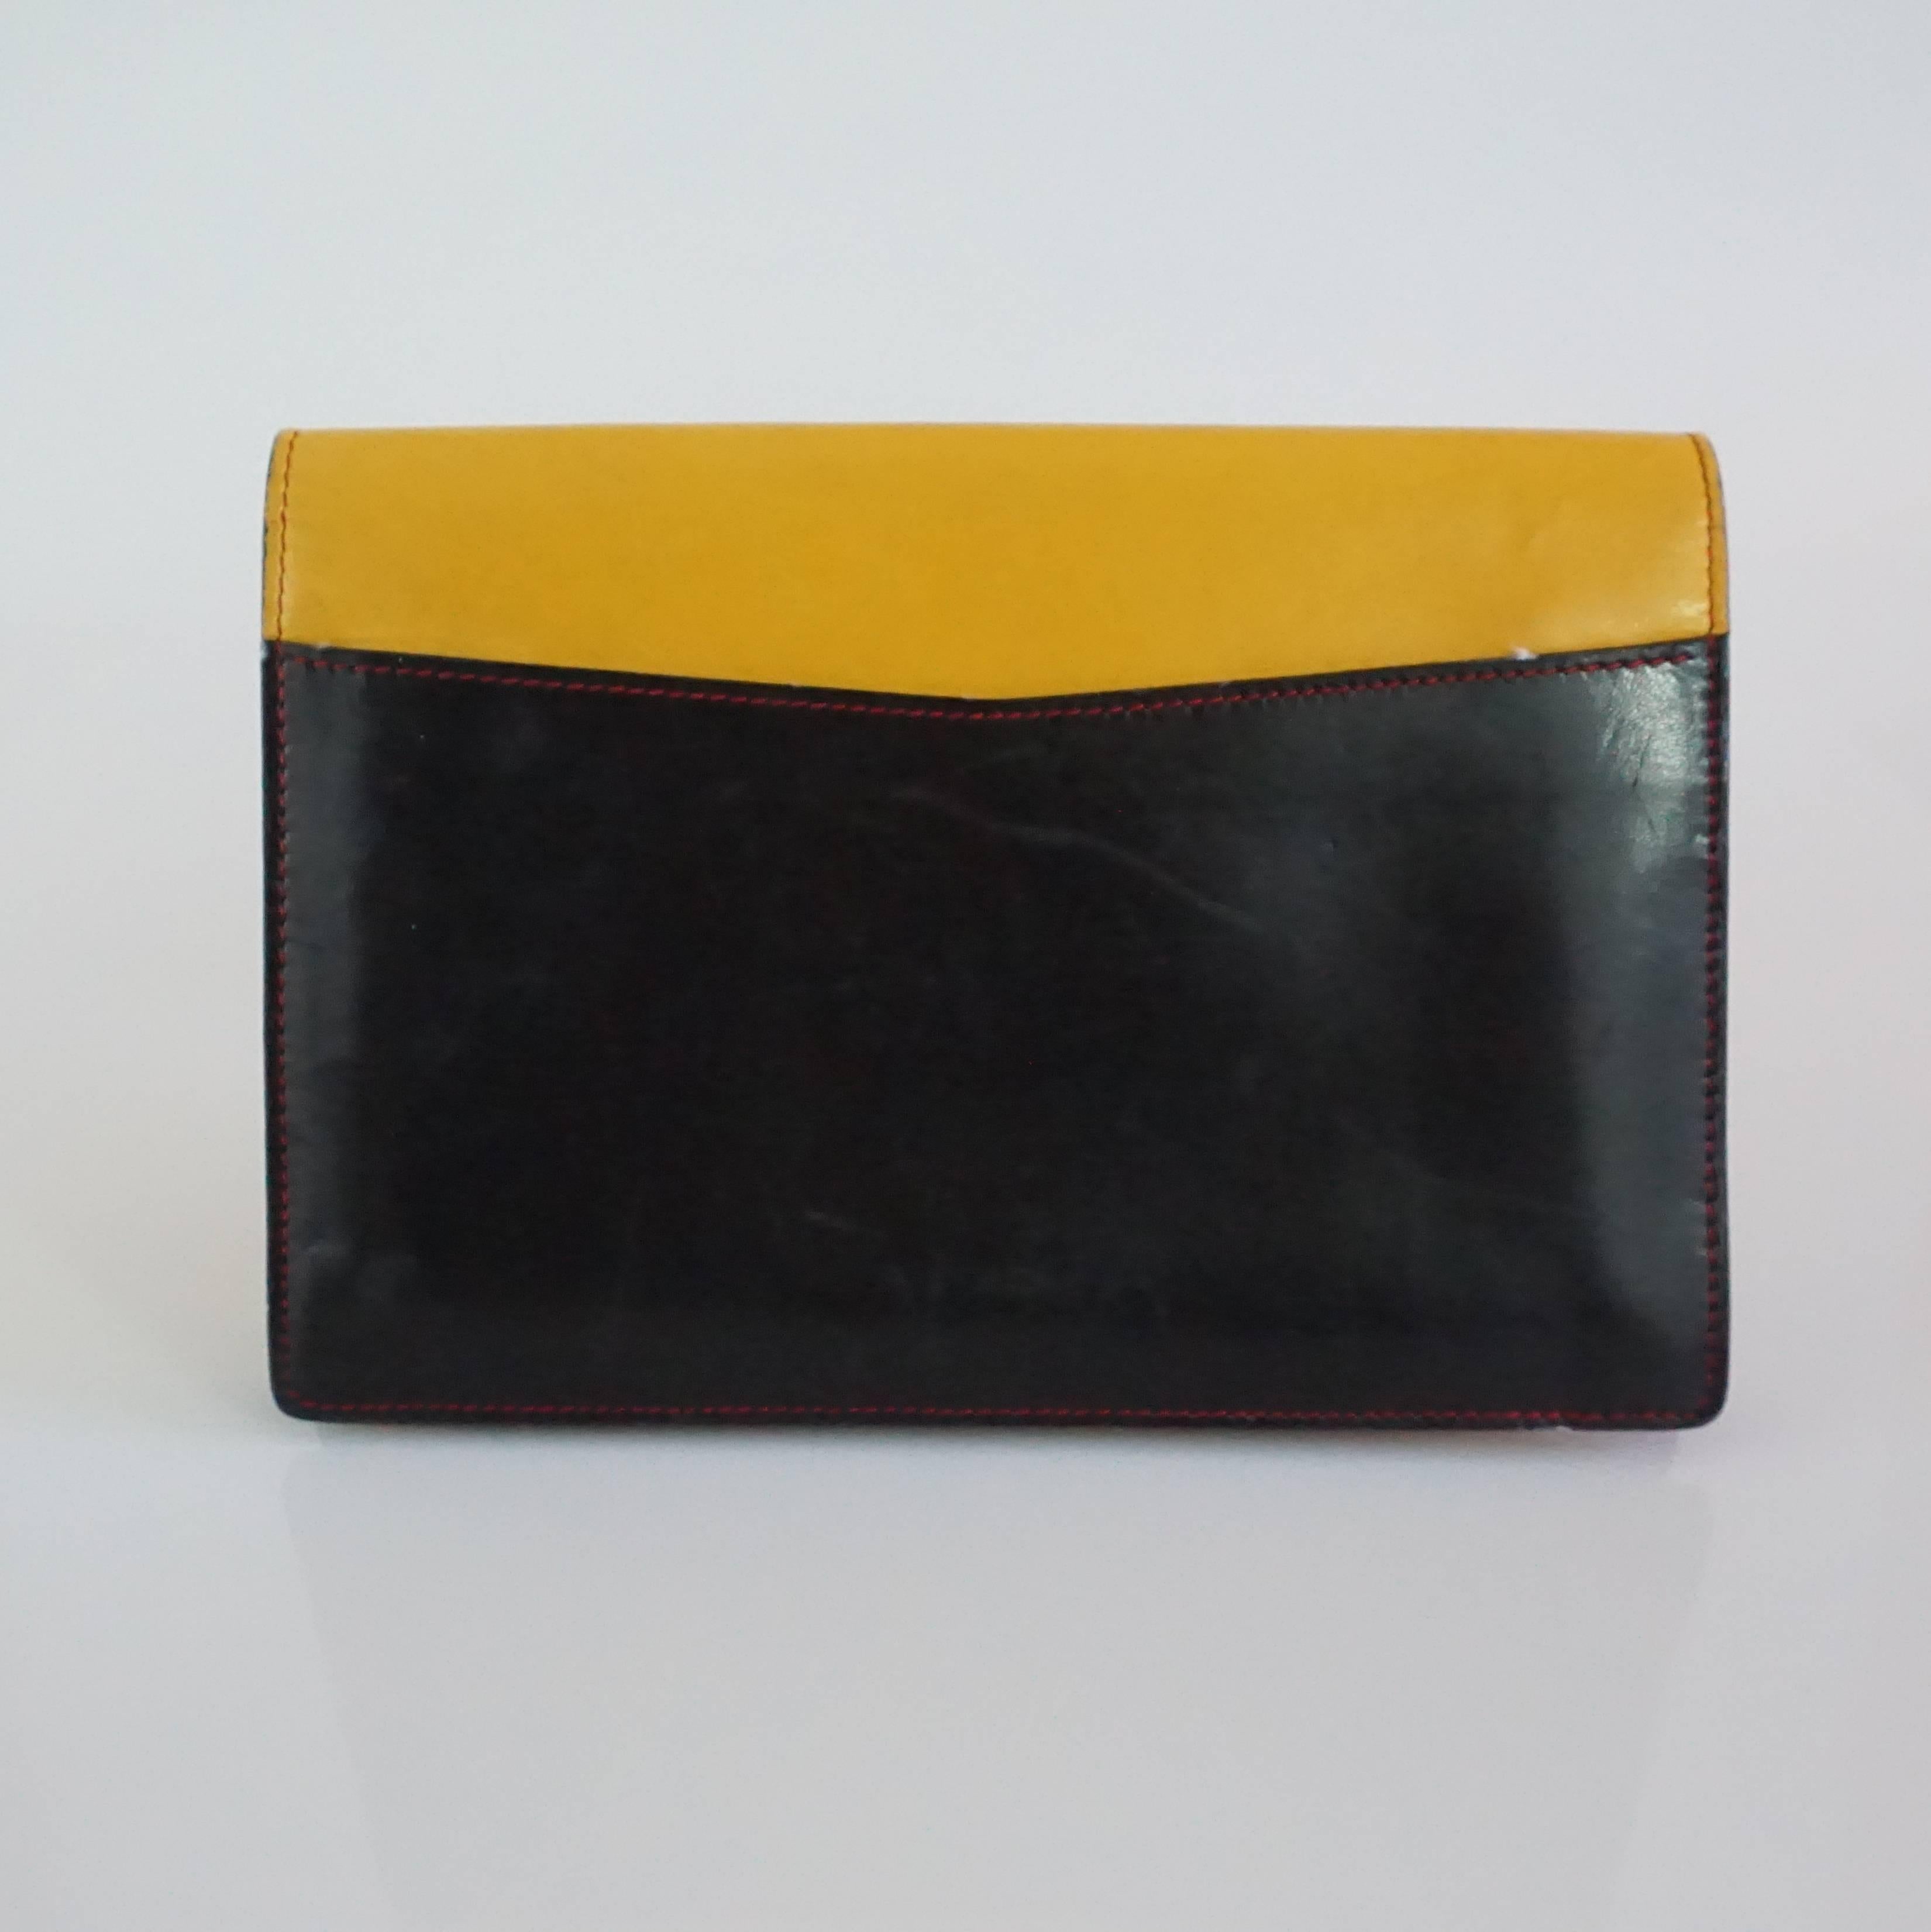 Isabel Canovas Black & Mustard Leather Envelope Clutch with Masquerade Detail - 1980's. This clutch is in fair vintage condition with visible markings on the leather such as those shown in the images; the masquerade charm and the inside lining have